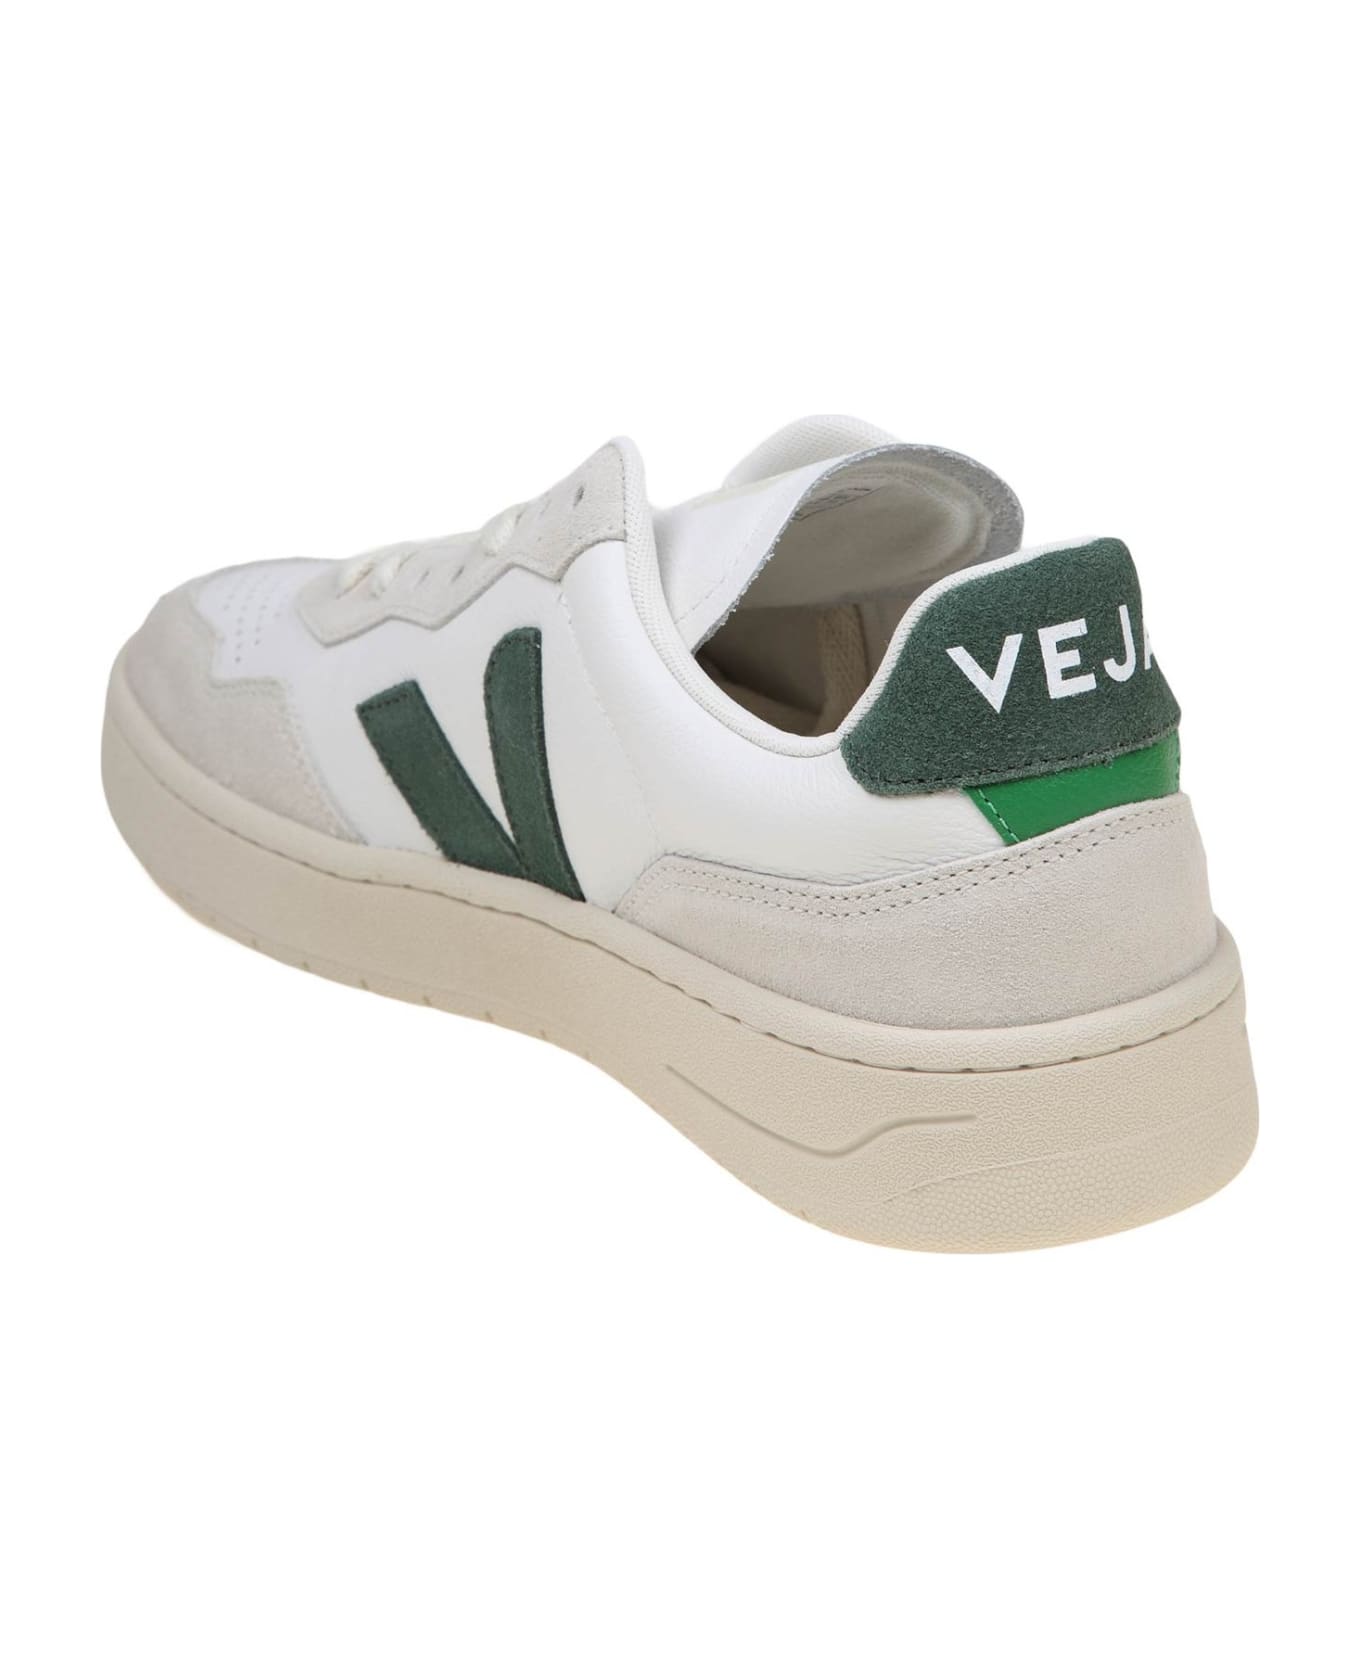 Veja V 90 Sneakers In White And Green Leather And Suede - WHITE/CYPRUS